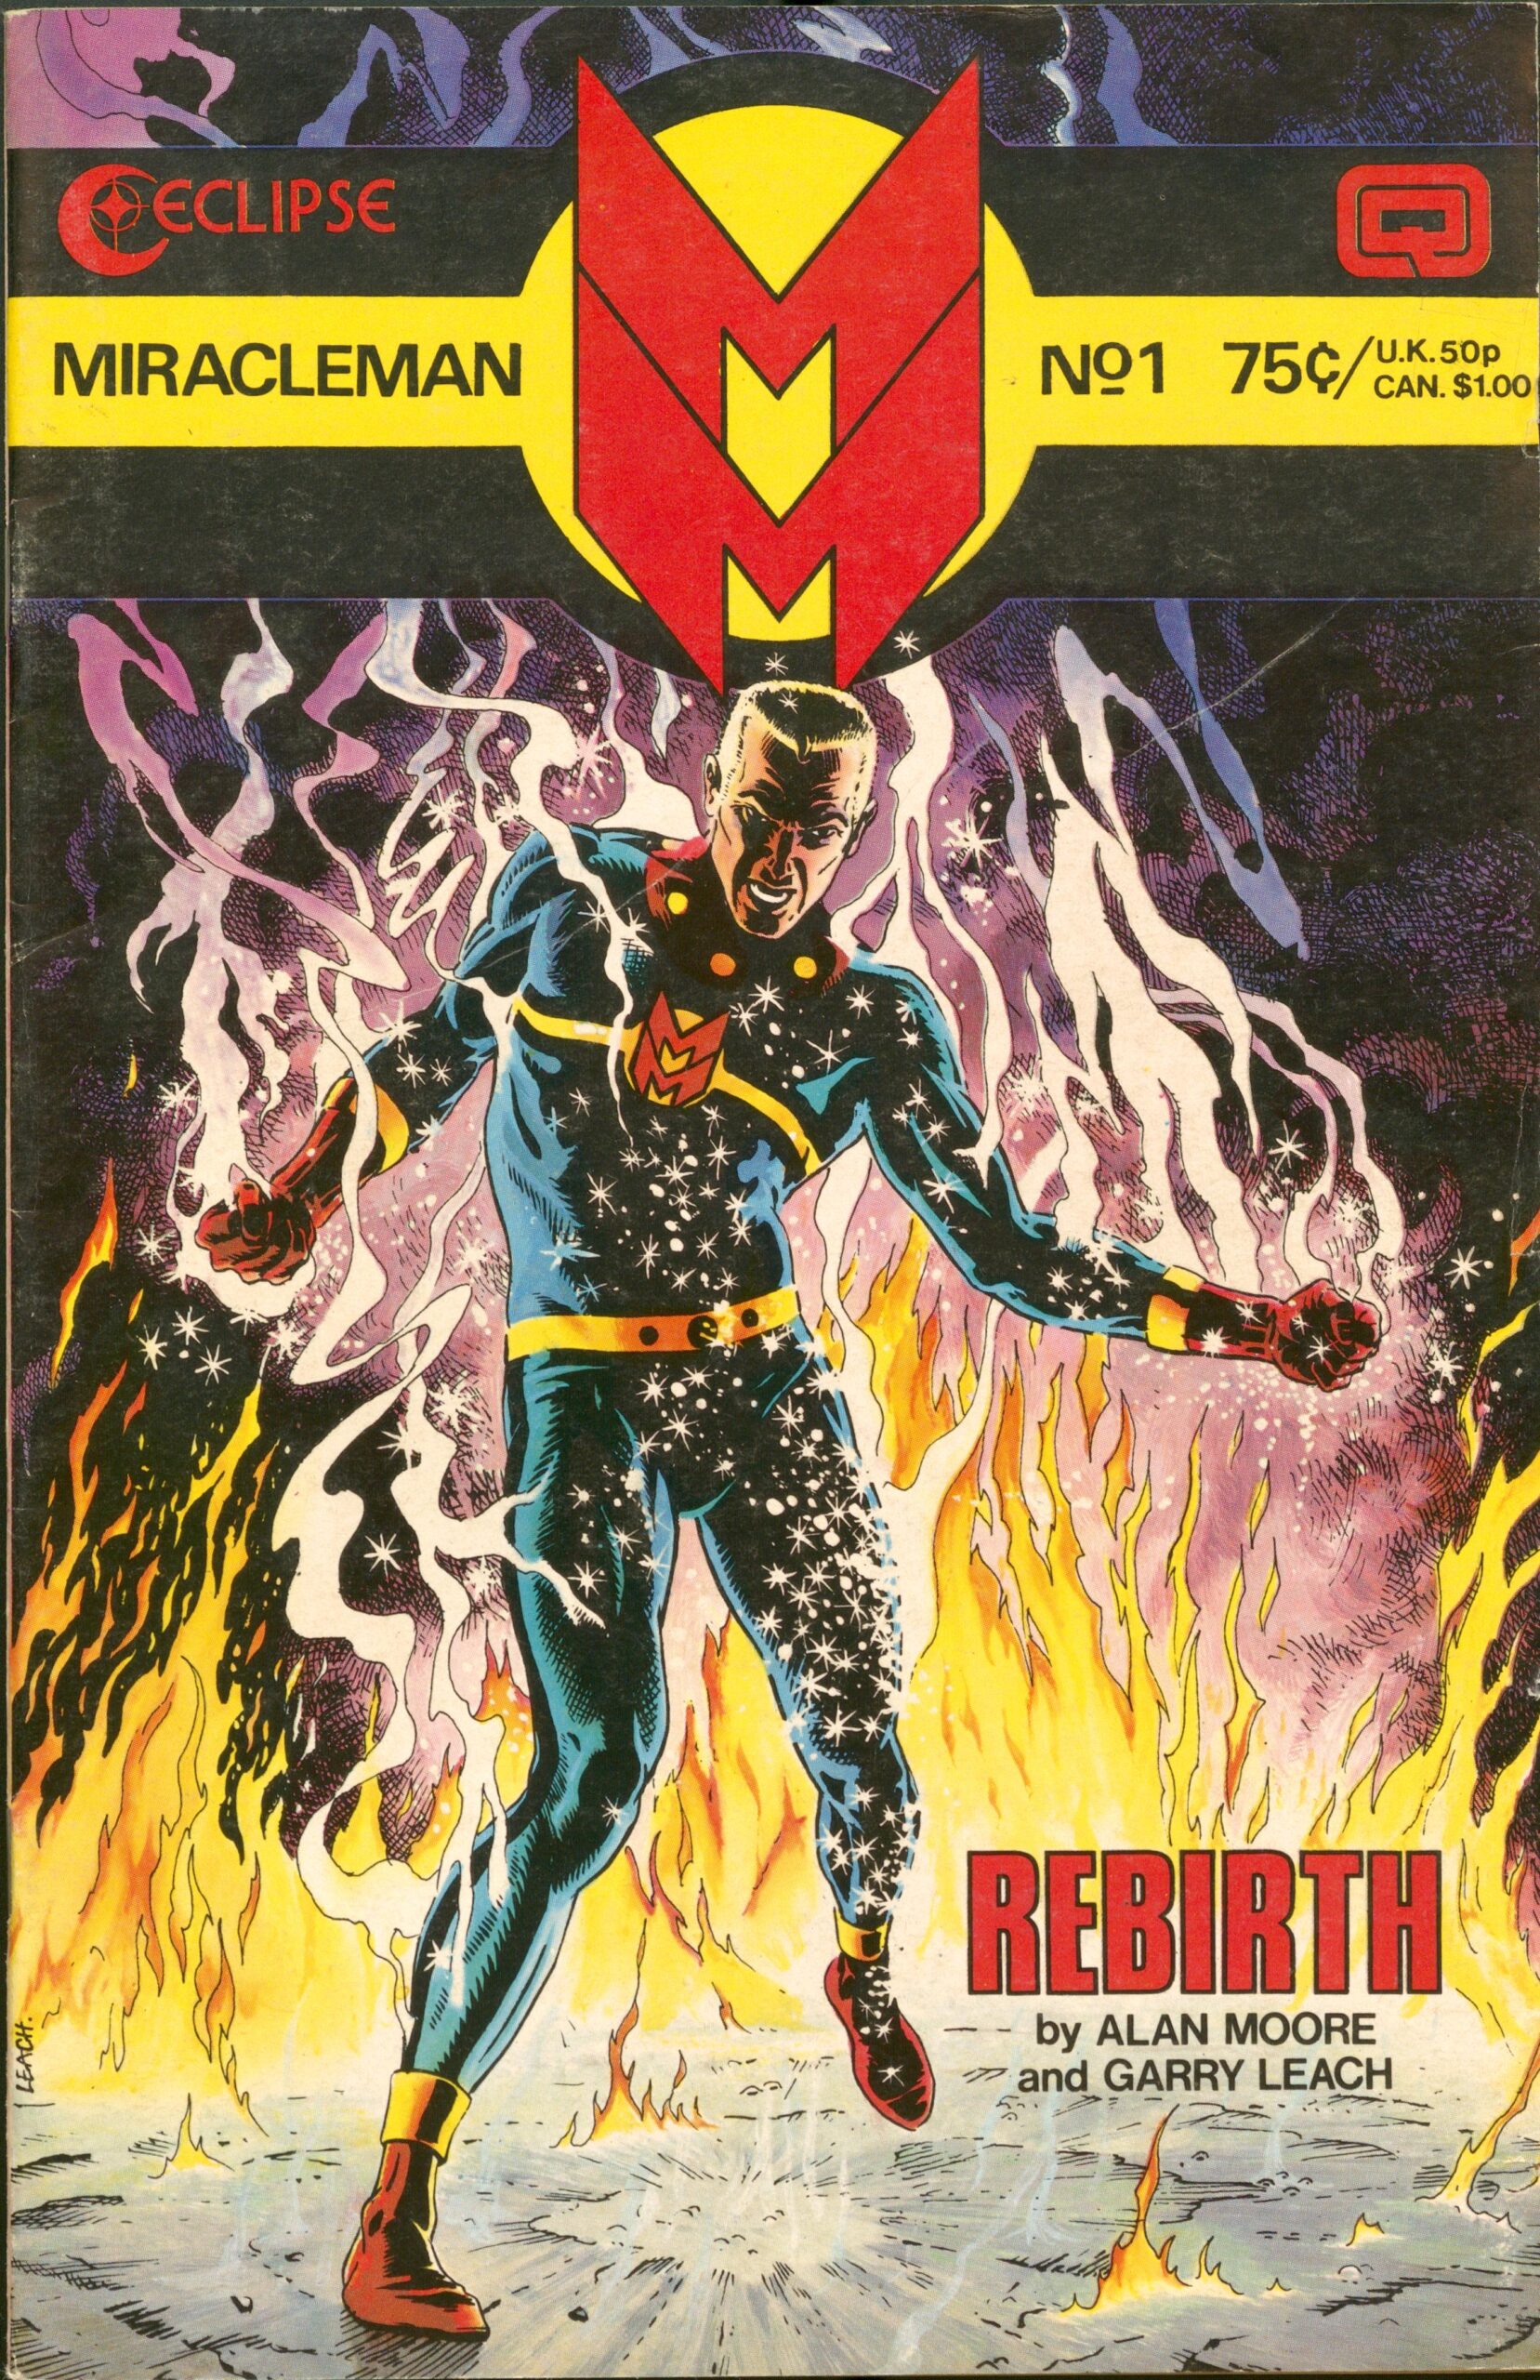 Comic book cover with Miracleman wreathed in whisps of smoke and light.